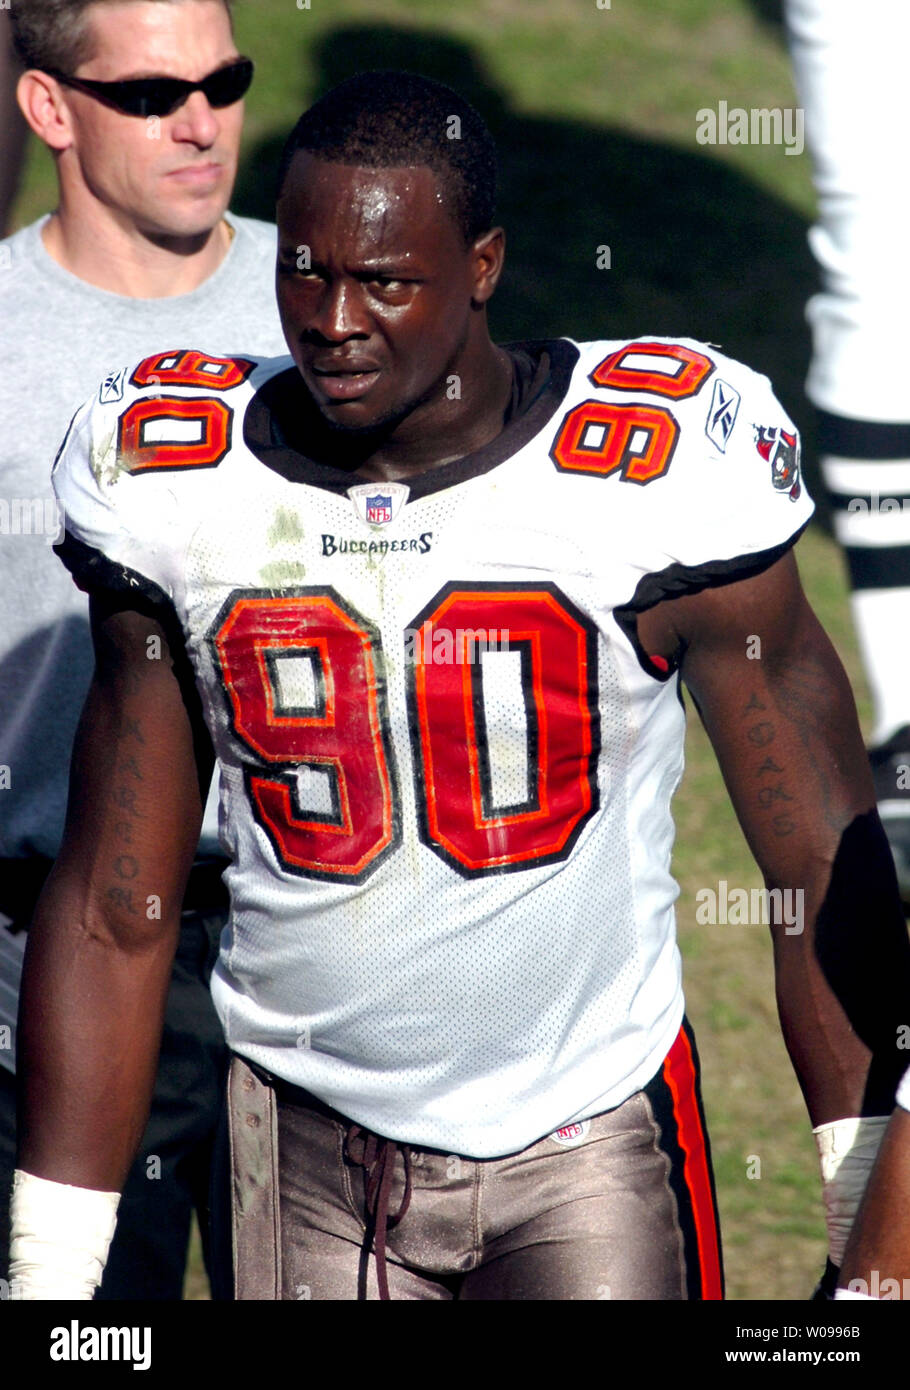 Tampa Bay Buccaneers' defensive end Gaines Adams (90) walks off the field at halftime at Raymond James Stadium in Tampa, Florida on January 6, 2008 in the first-round NFC Wildcard playoff game against the New York Giants. The Giants beat the Buccaneers 24-14.   (UPI Photo/Cathy Kapulka). Stock Photo